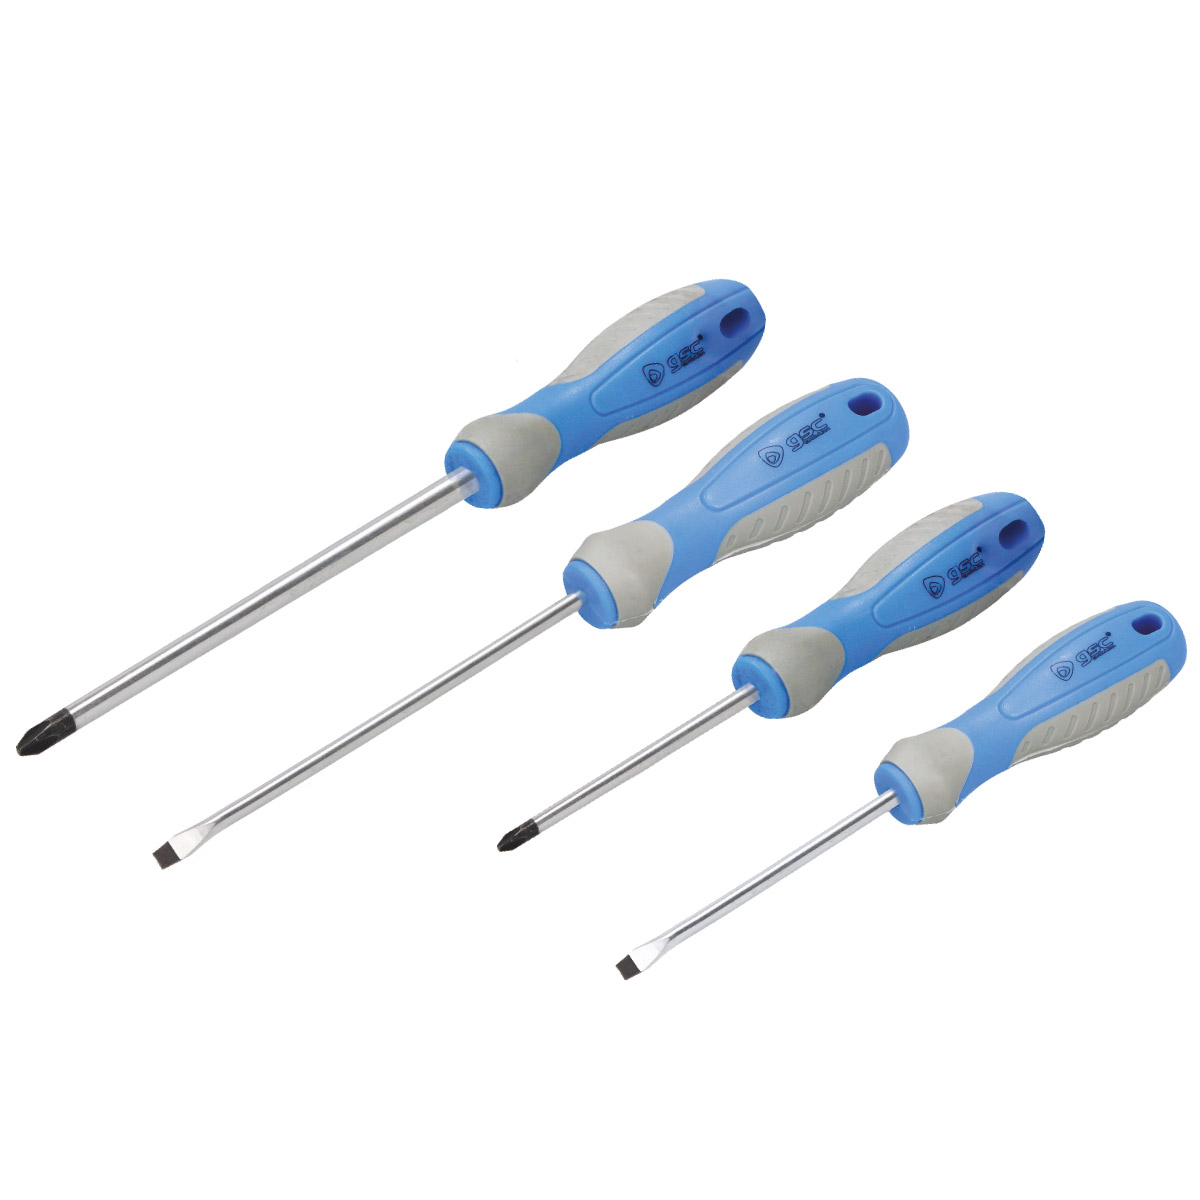 Set of 6 screwdrivers - 2 flat and 2 Philips